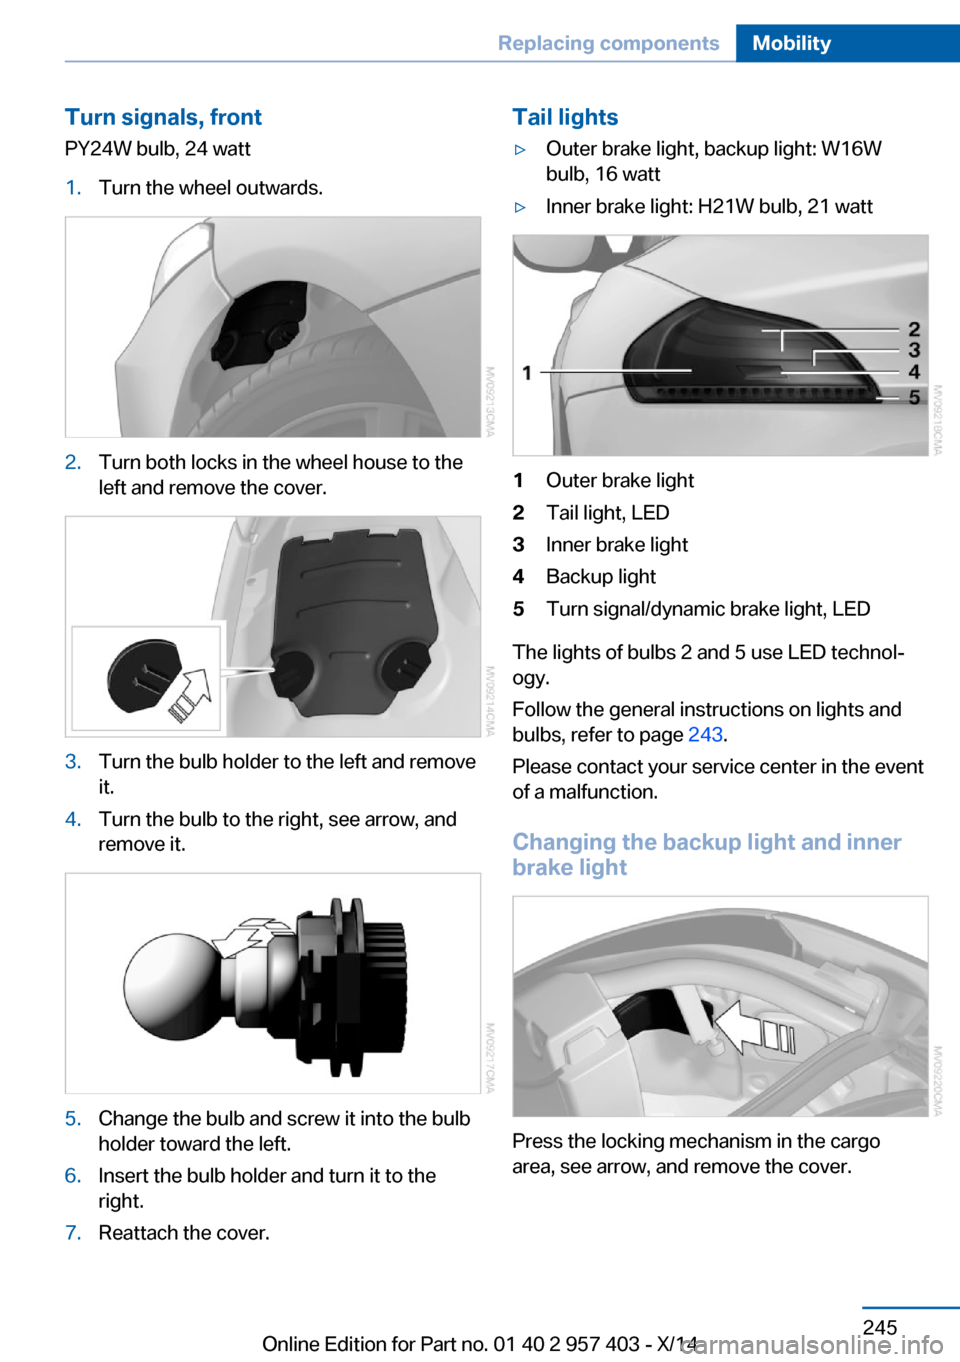 BMW Z4 2014 E89 Owners Manual Turn signals, frontPY24W bulb, 24 watt1.Turn the wheel outwards.2.Turn both locks in the wheel house to the
left and remove the cover.3.Turn the bulb holder to the left and remove
it.4.Turn the bulb t